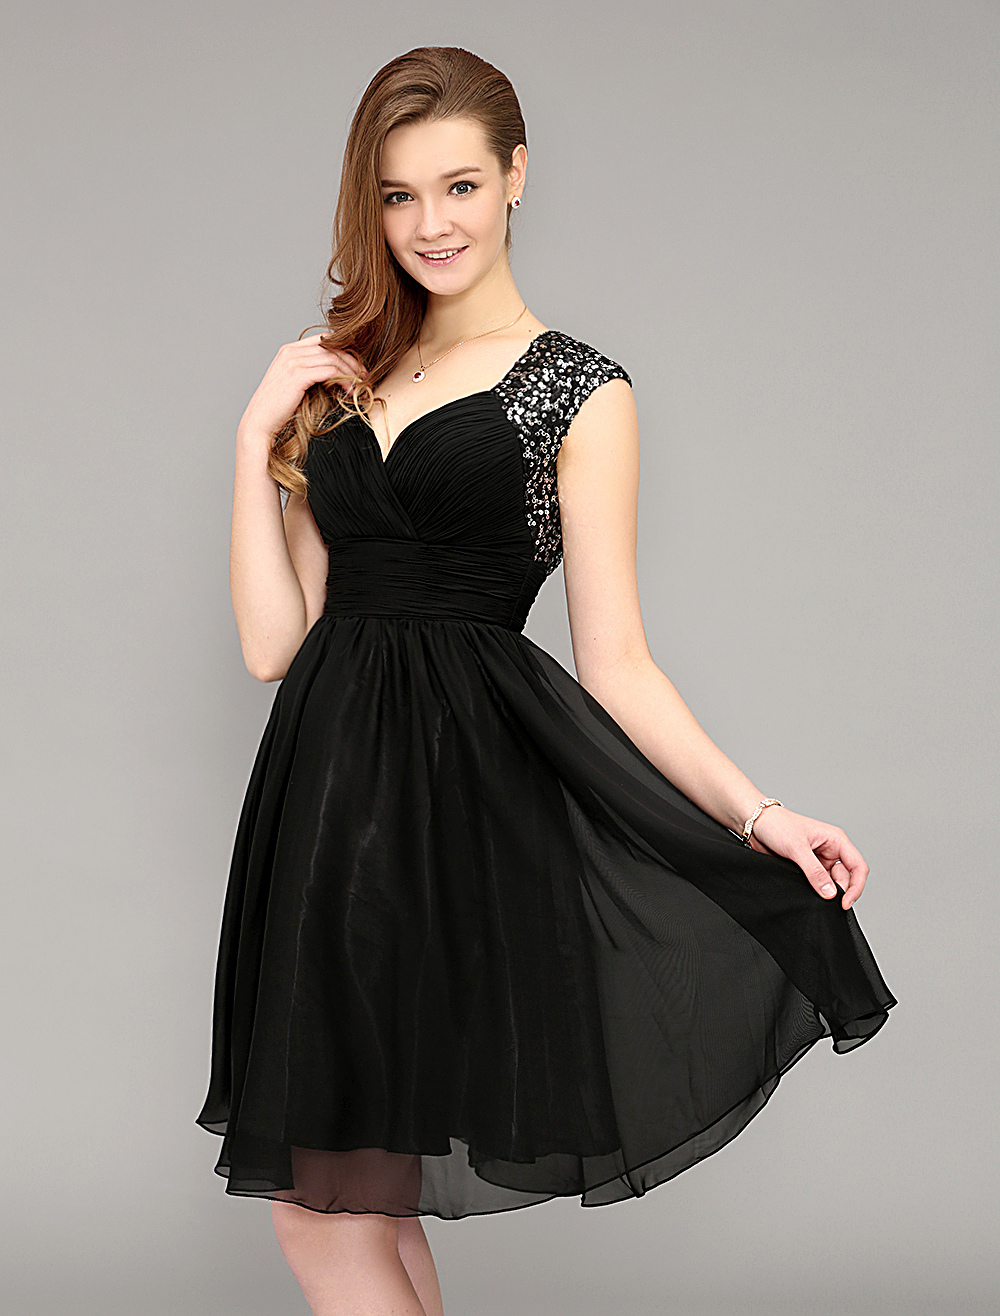 Short Sequined Black Cocktail Dress With Open Back Wedding Guest Dress ...